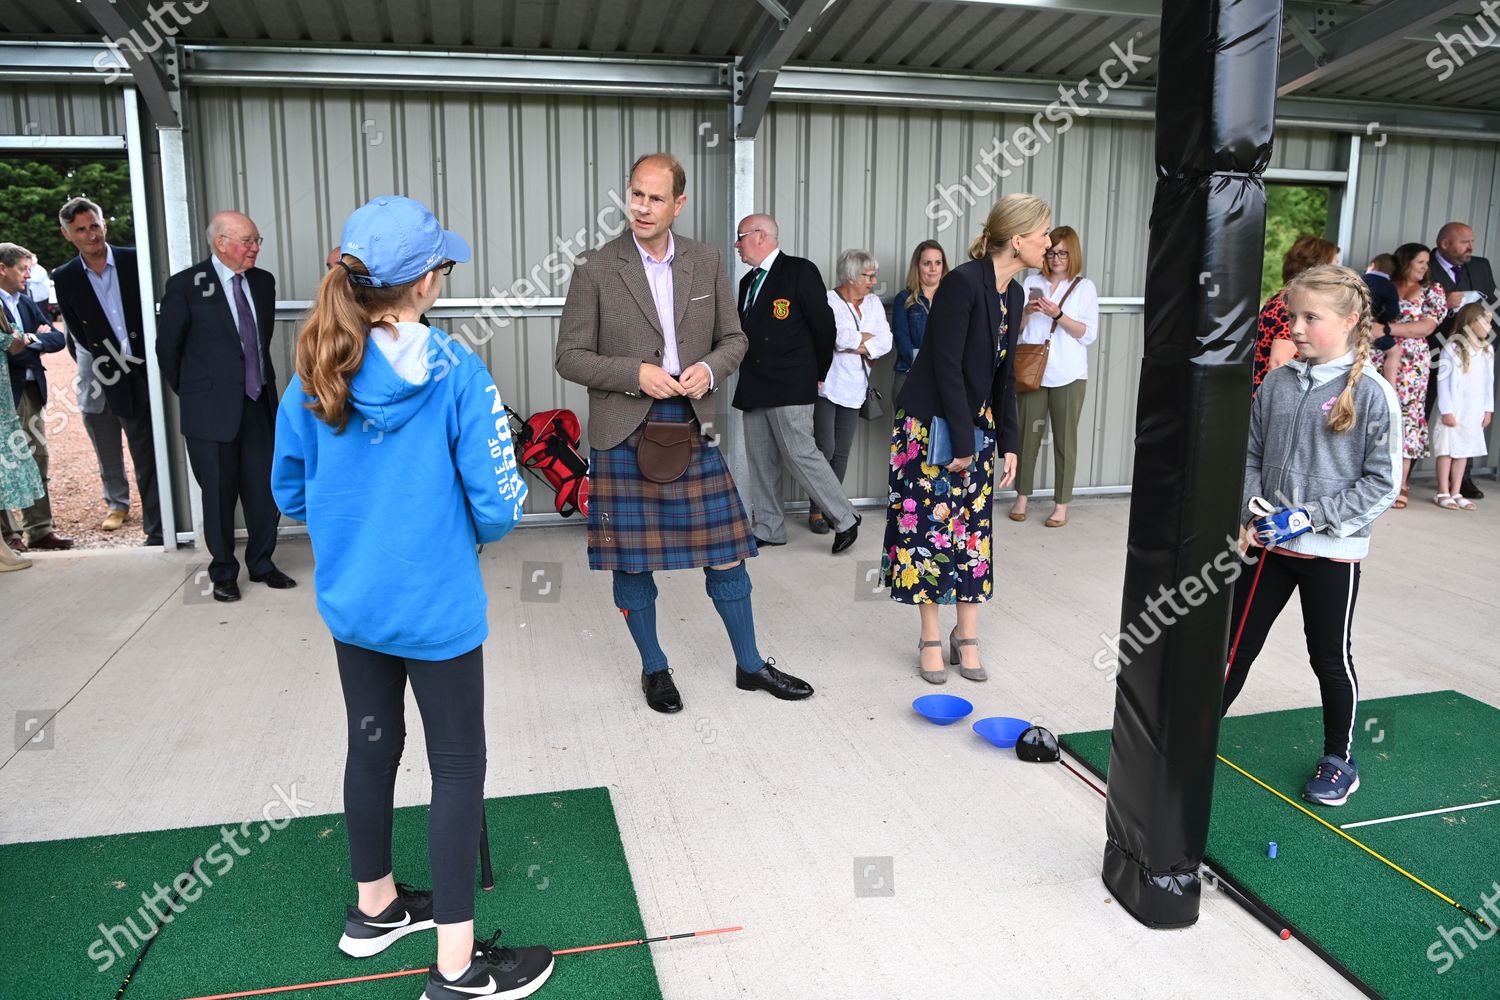 CASA REAL BRITÁNICA - Página 76 Prince-edward-and-sophie-countess-of-wessex-visit-to-forfar-golf-club-scotland-uk-shutterstock-editorial-12172307bb